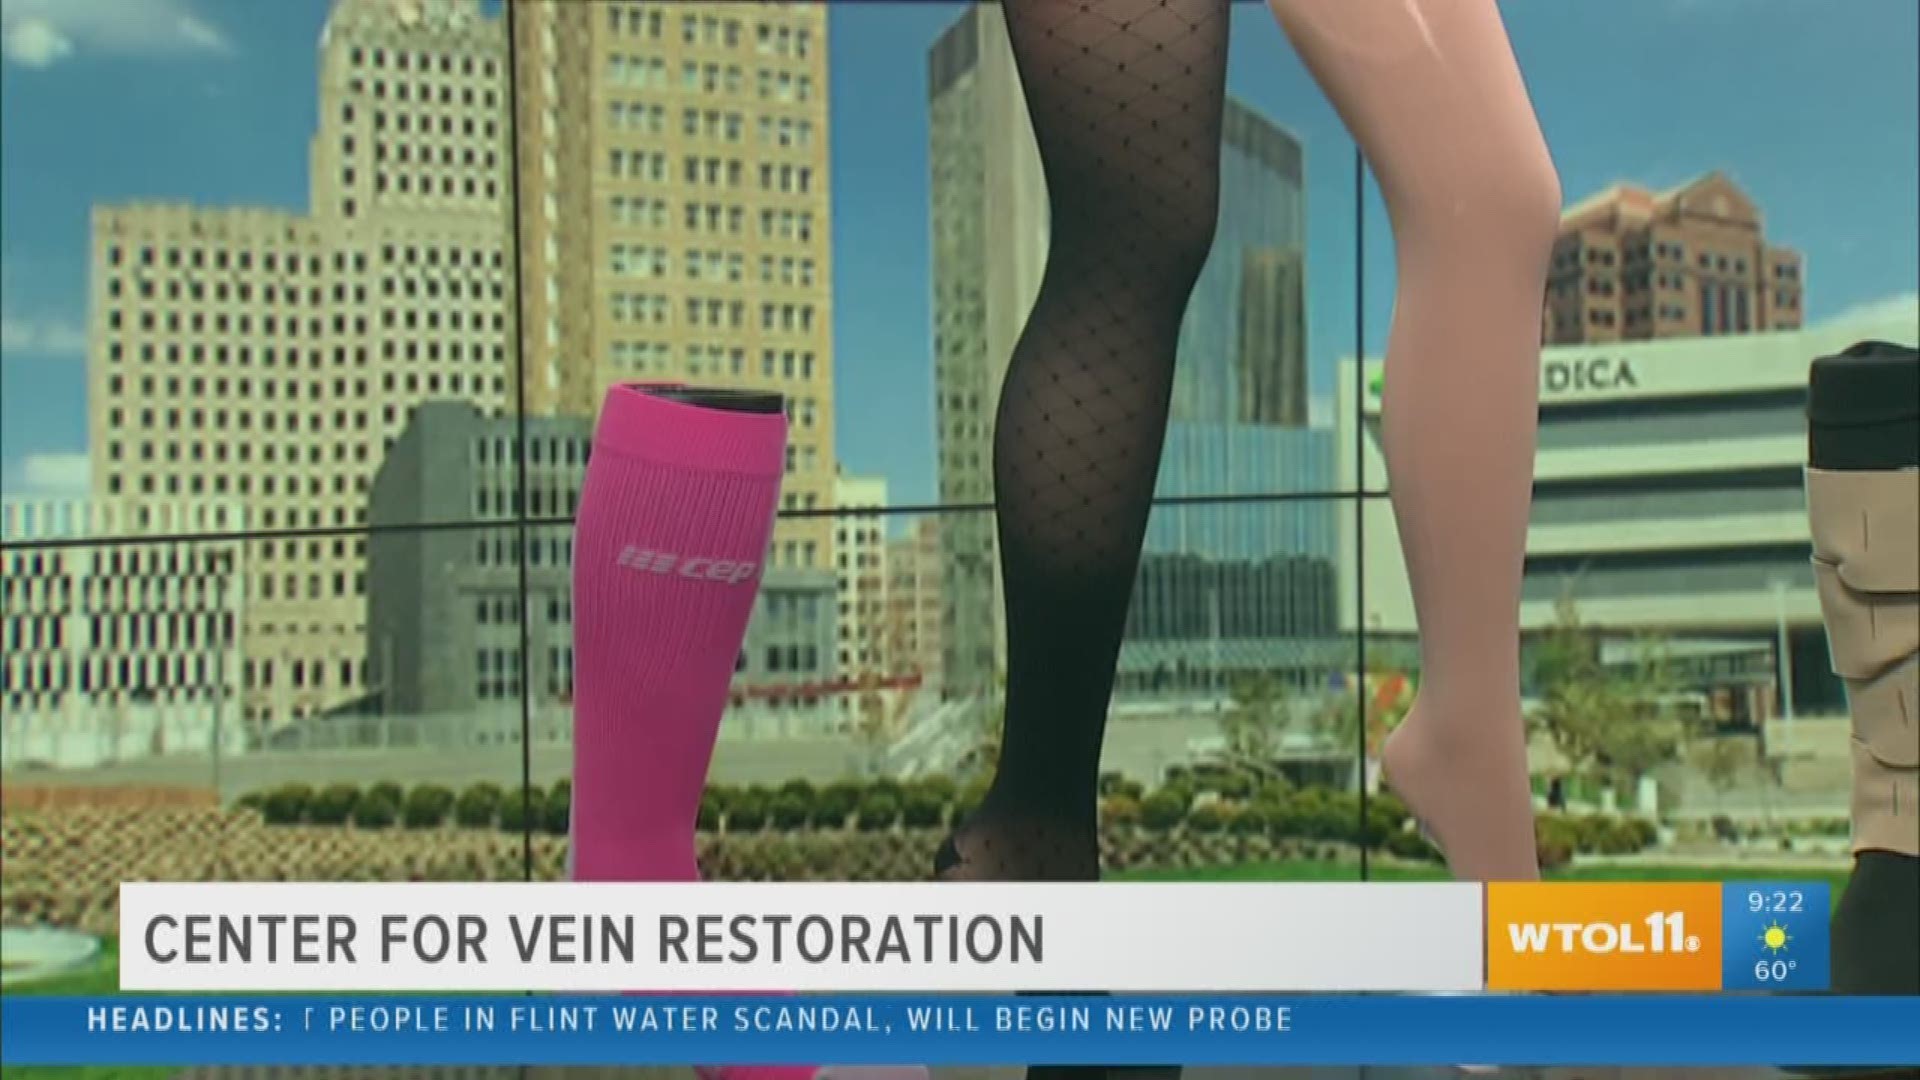 If you stand or sit for a long period of time, the Center for Vein Restoration says you might want to think about getting a pair of compression stockings.